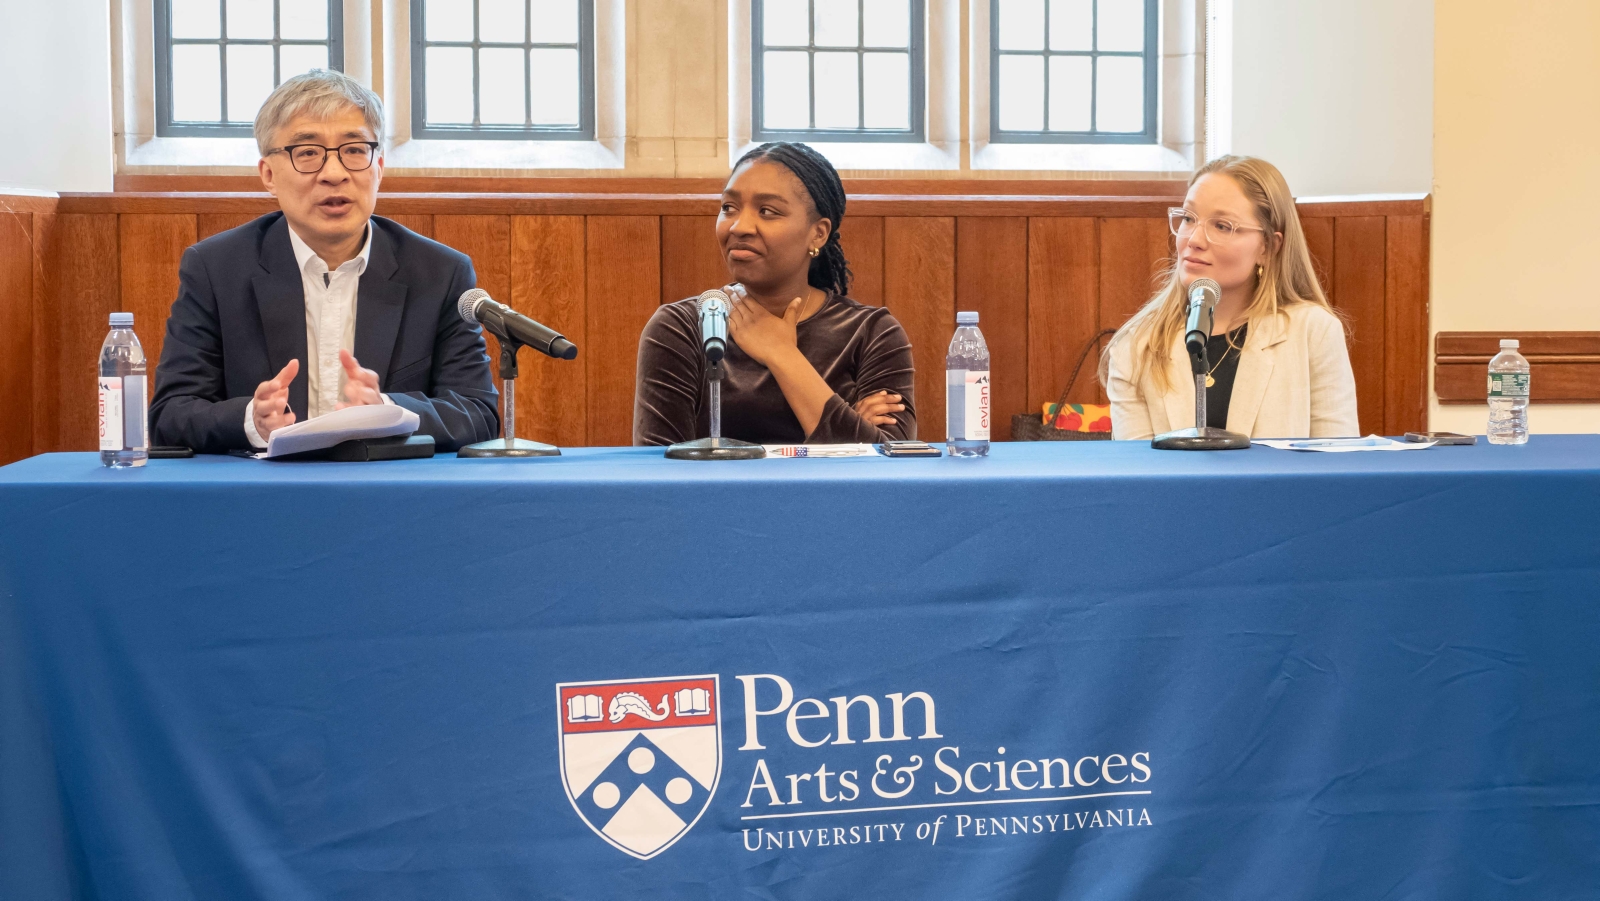 Guobin Yang, Adetobi Moses, and Liz Hallgren sitting at a table infront of windows. Yang speaks into a microphone, while Moses and Hallgren look towards him. Moses puts a hand on her chest. On the table are water bottles and a few microphones in stands positioned in front of the speakers. The tablecloth has the Penn logo, which includes the text: "Penn Arts & Sciences" and "University of Pennsylvania".